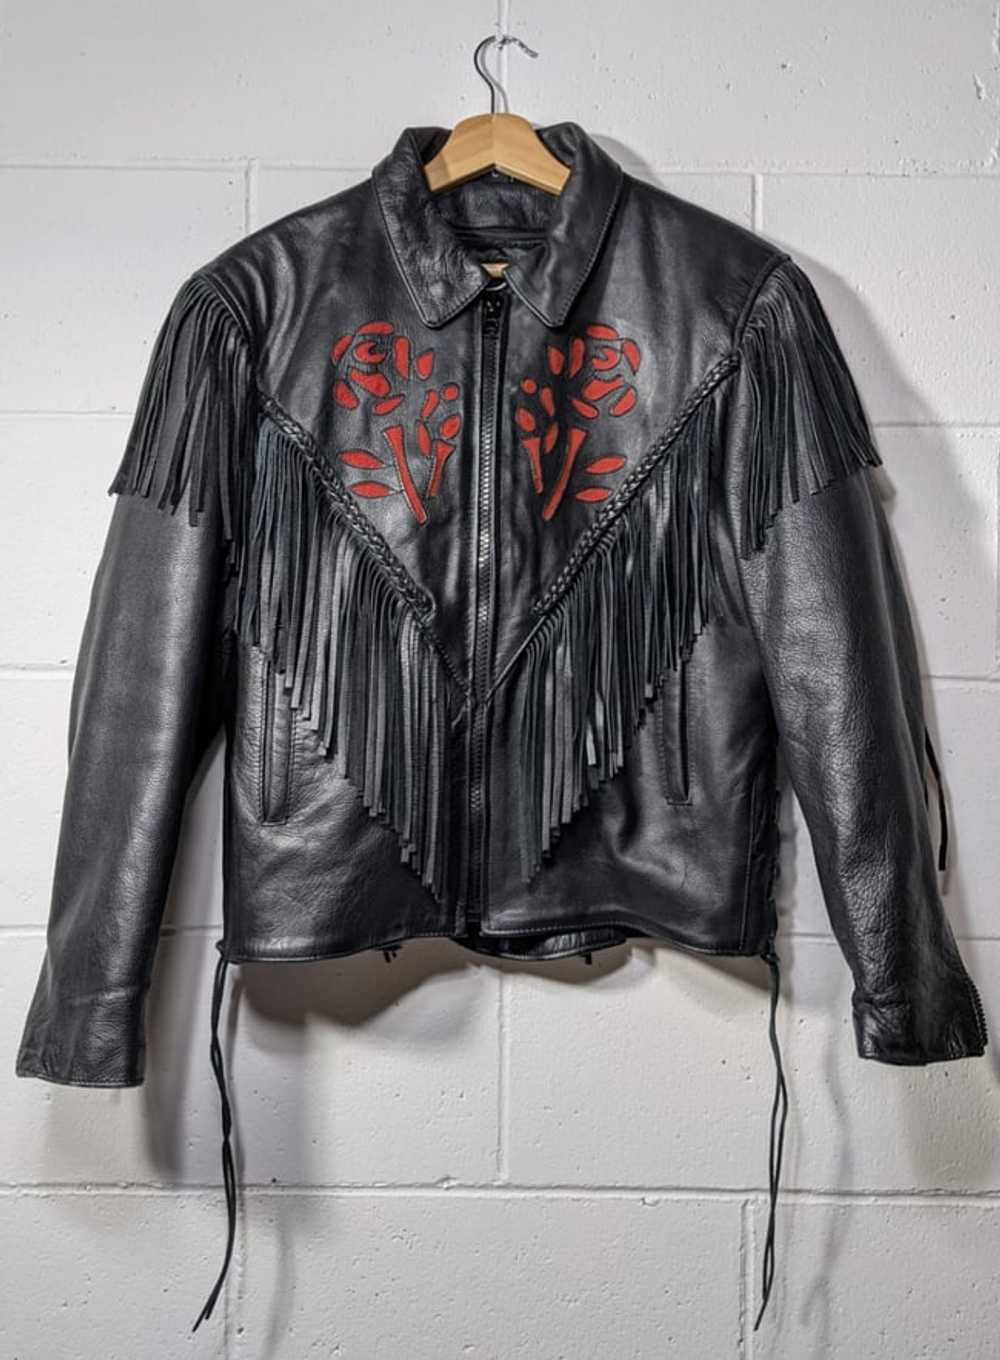 80's Leather Motorcycle Jacket with Rose Appliqué - image 1